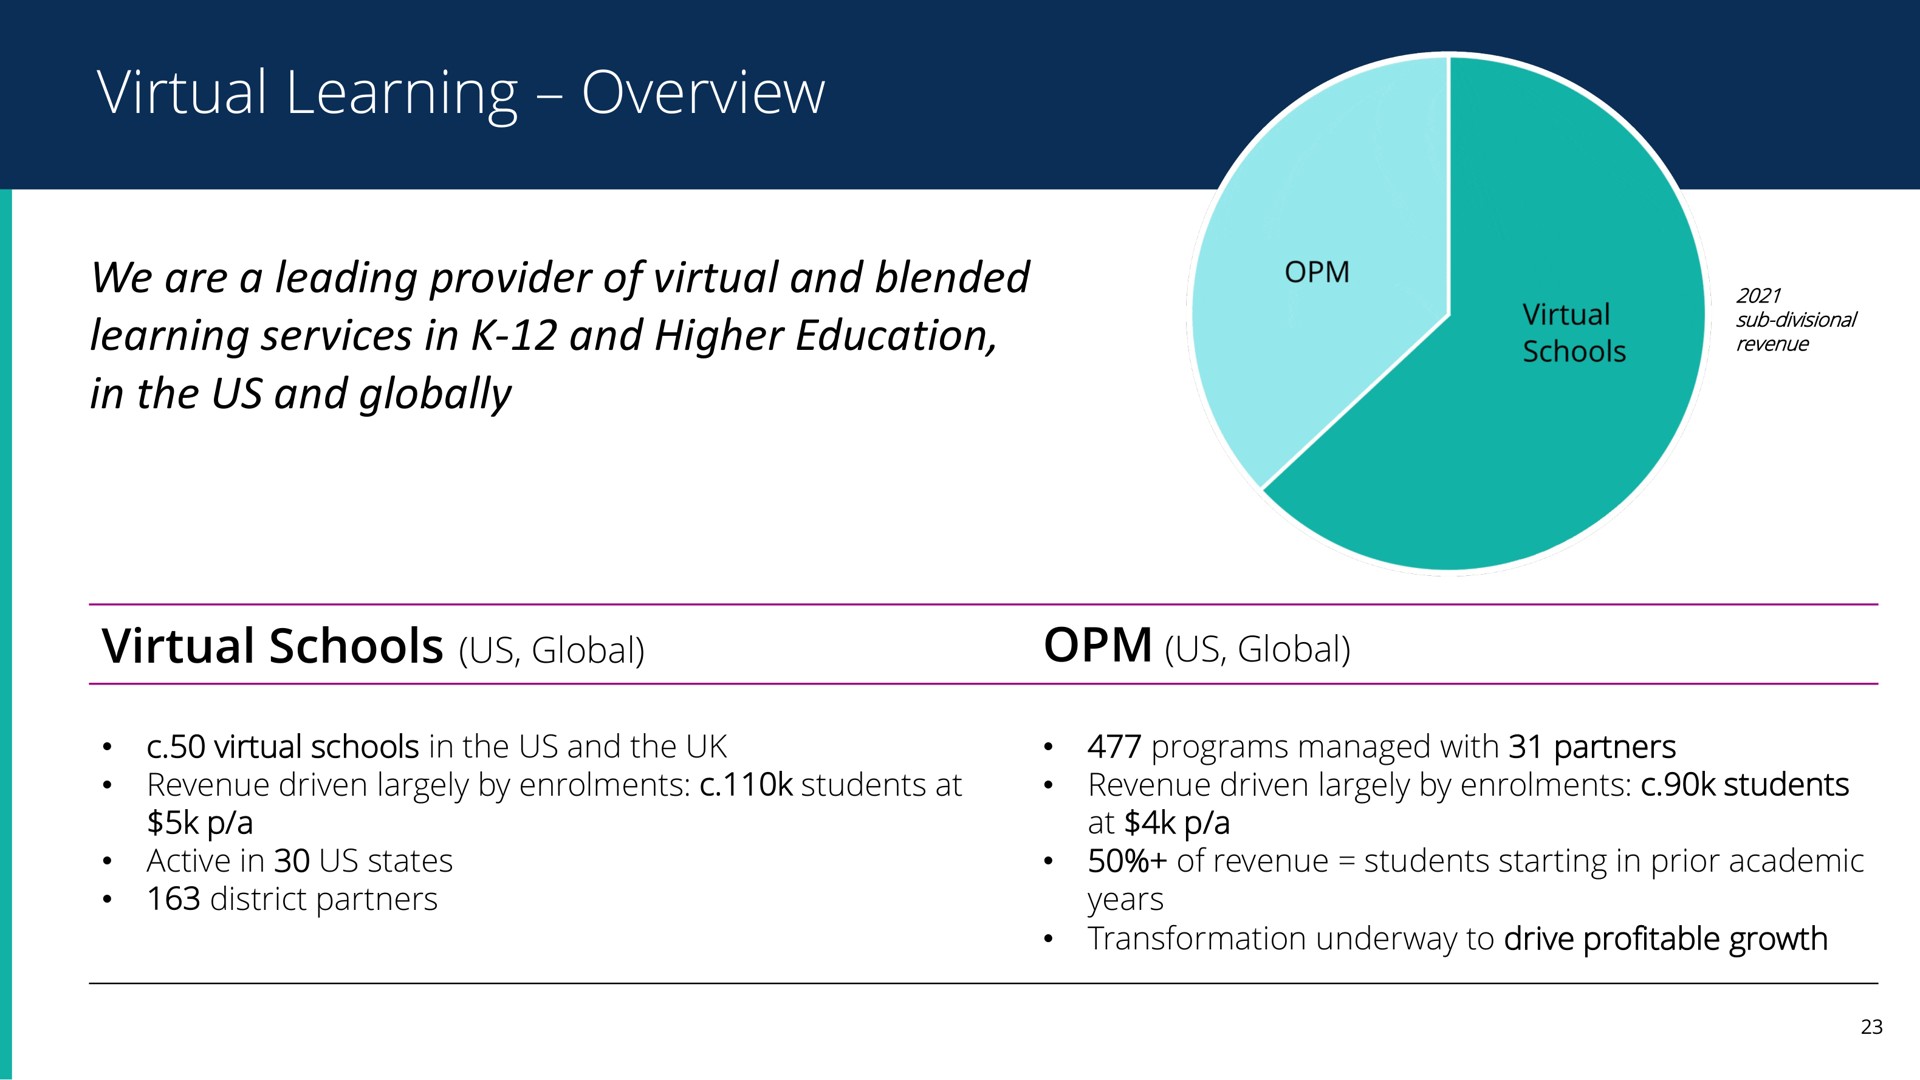 virtual learning overview | Pearson